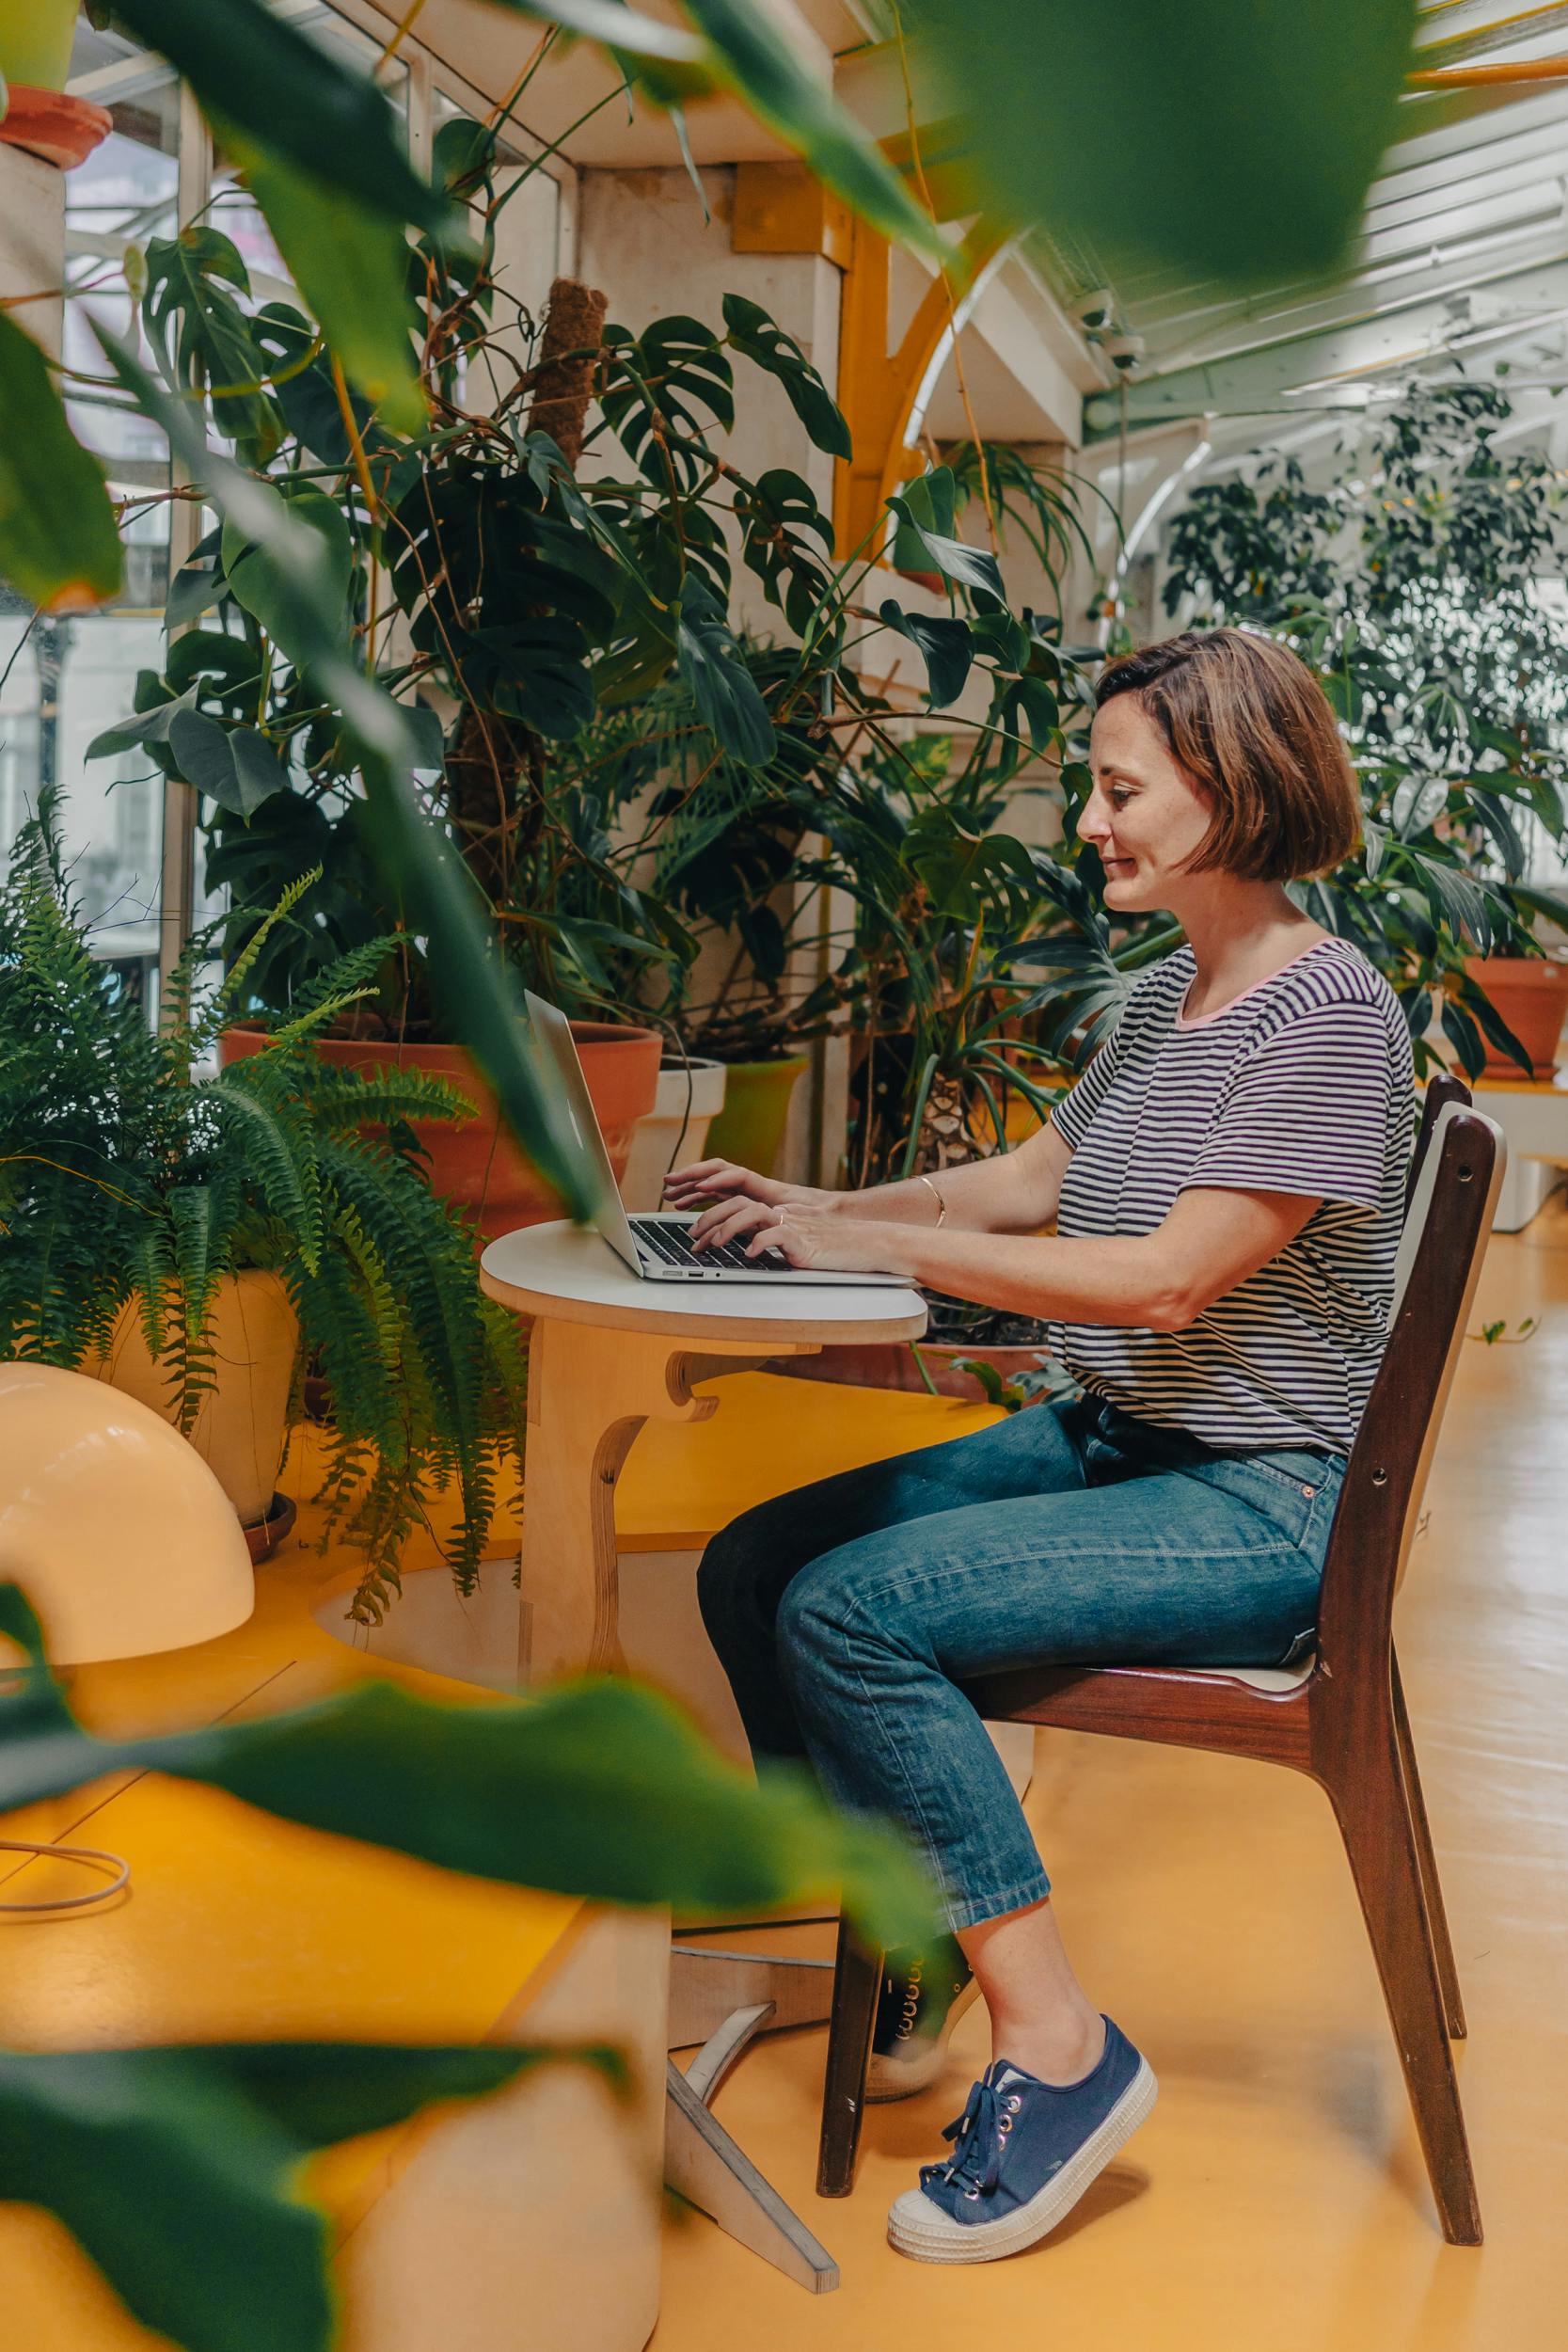 Woman sitting on a chair and writing on her laptop, surrounded by vased plants